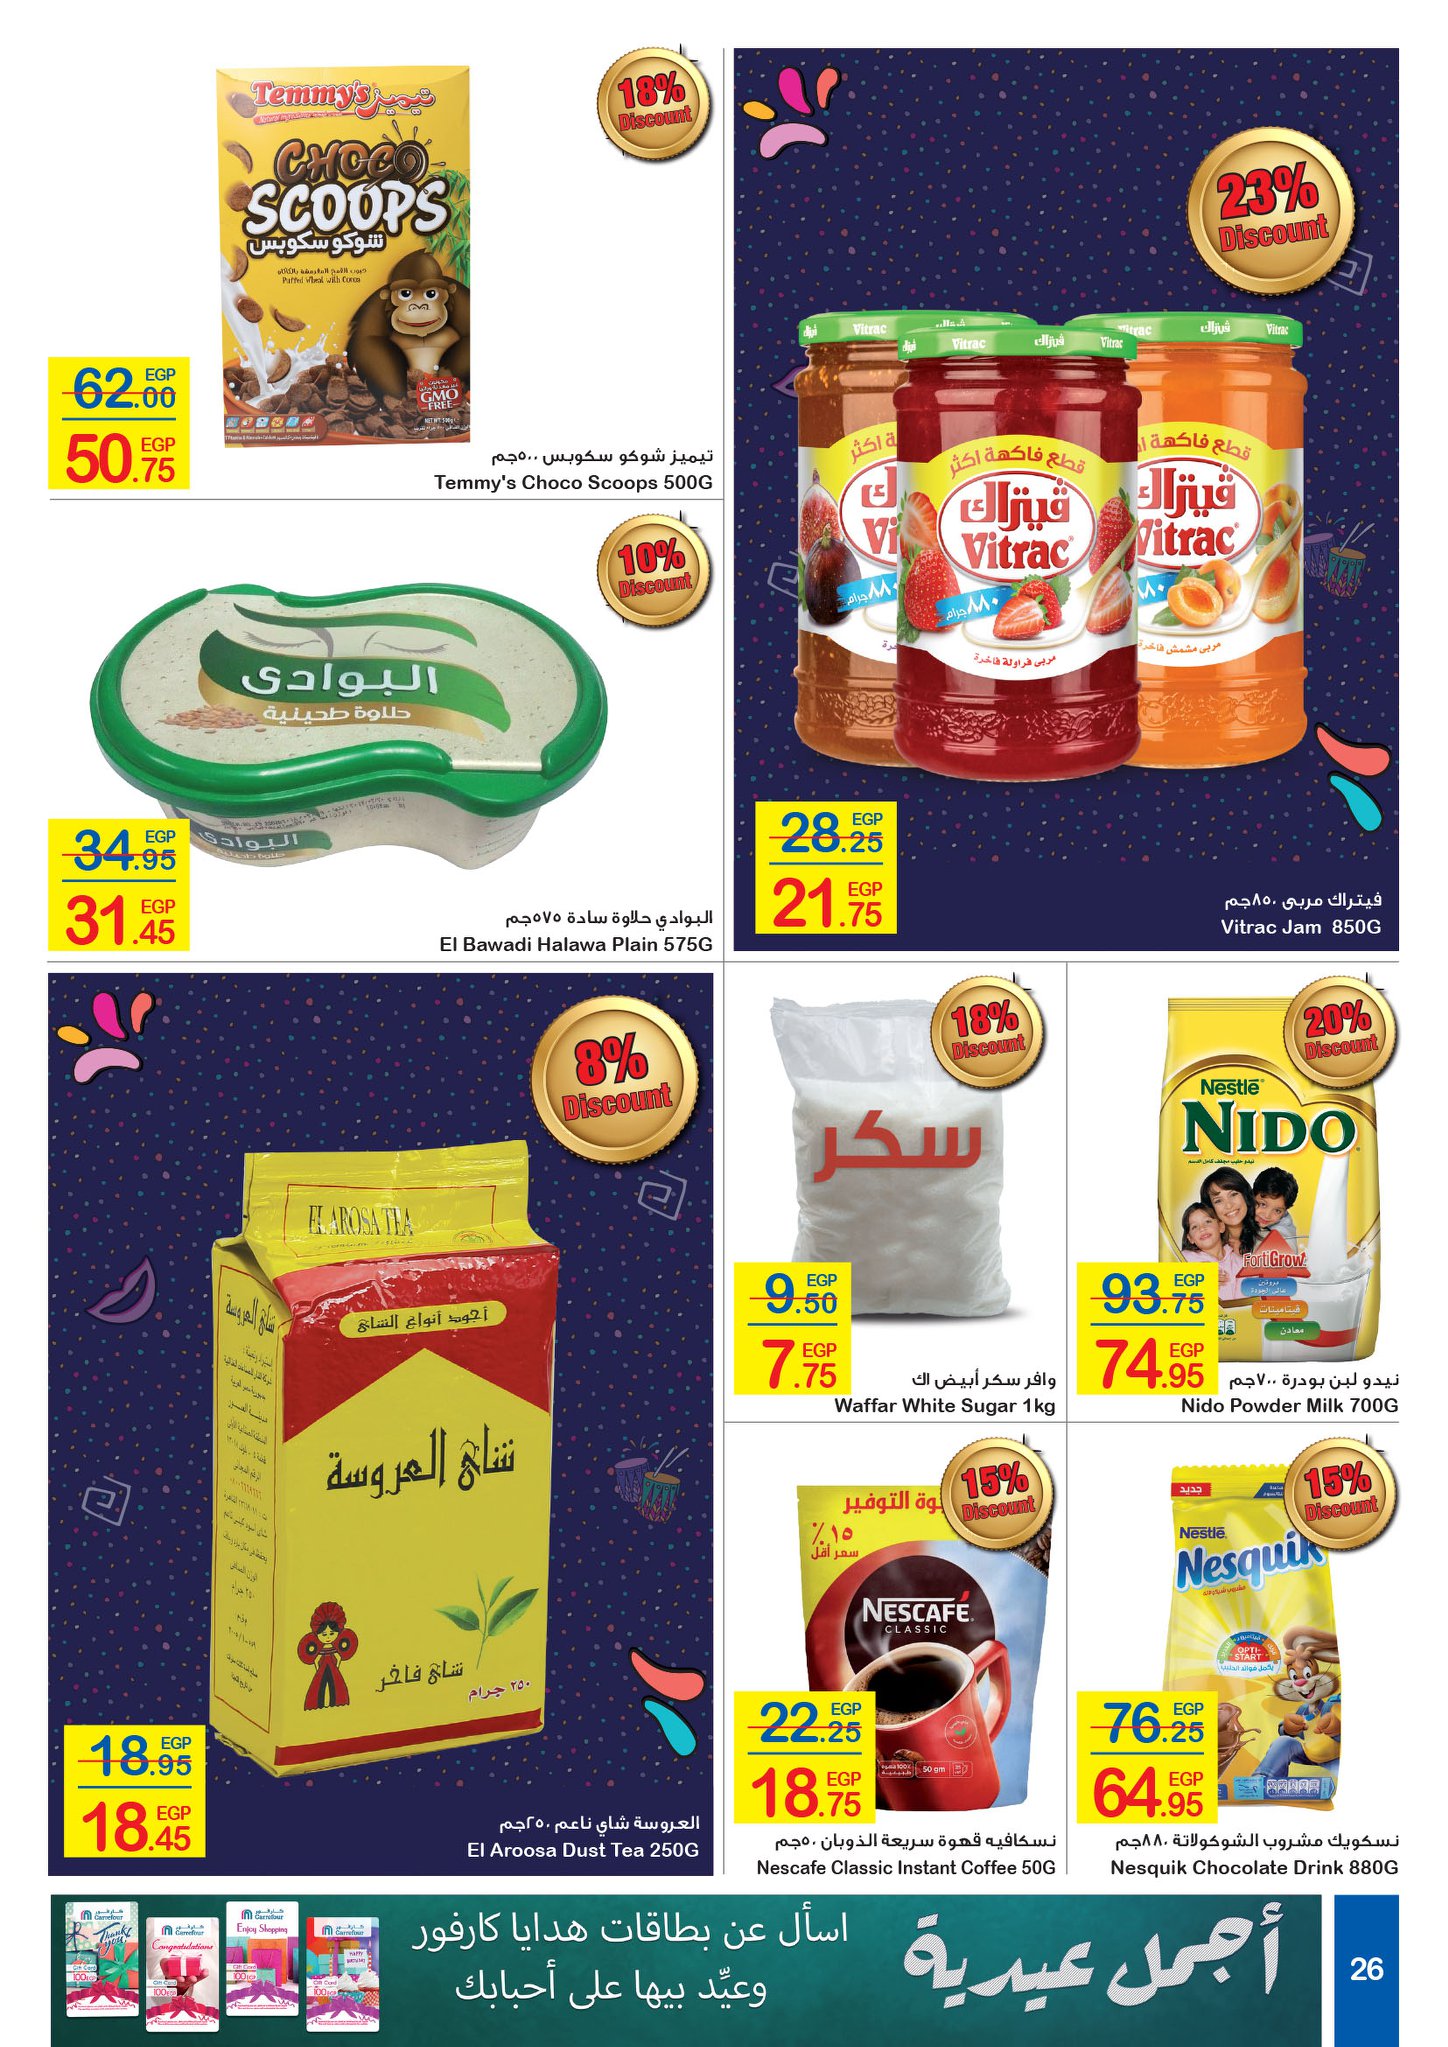 Carrefour Flyer from 16/7 till 27/7 | Carrefour Egypt 26